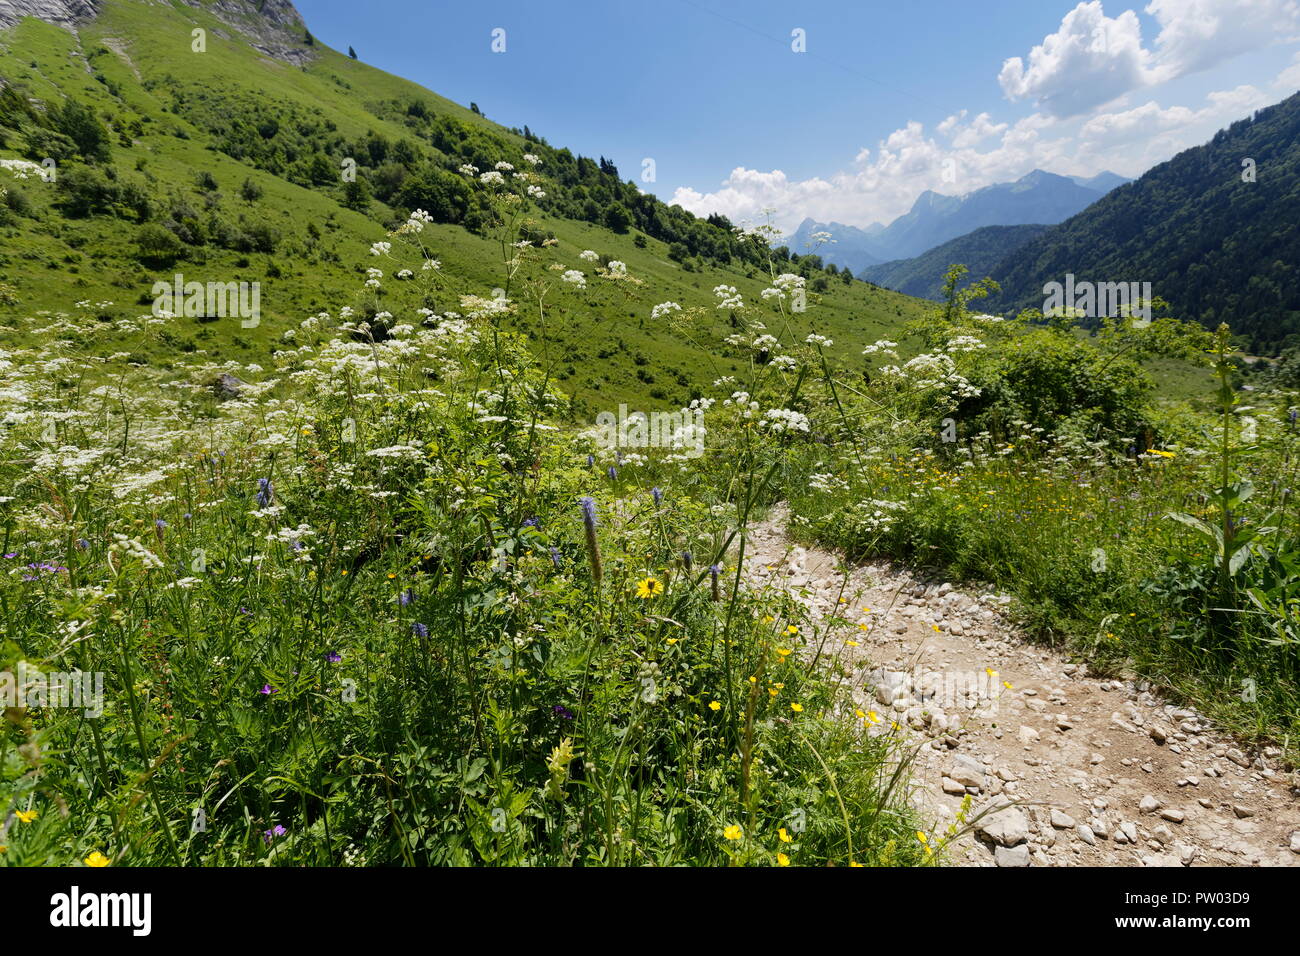 Meadow flowers in full bloom beside a footpath on the hills around Col de la Forclaz France Stock Photo